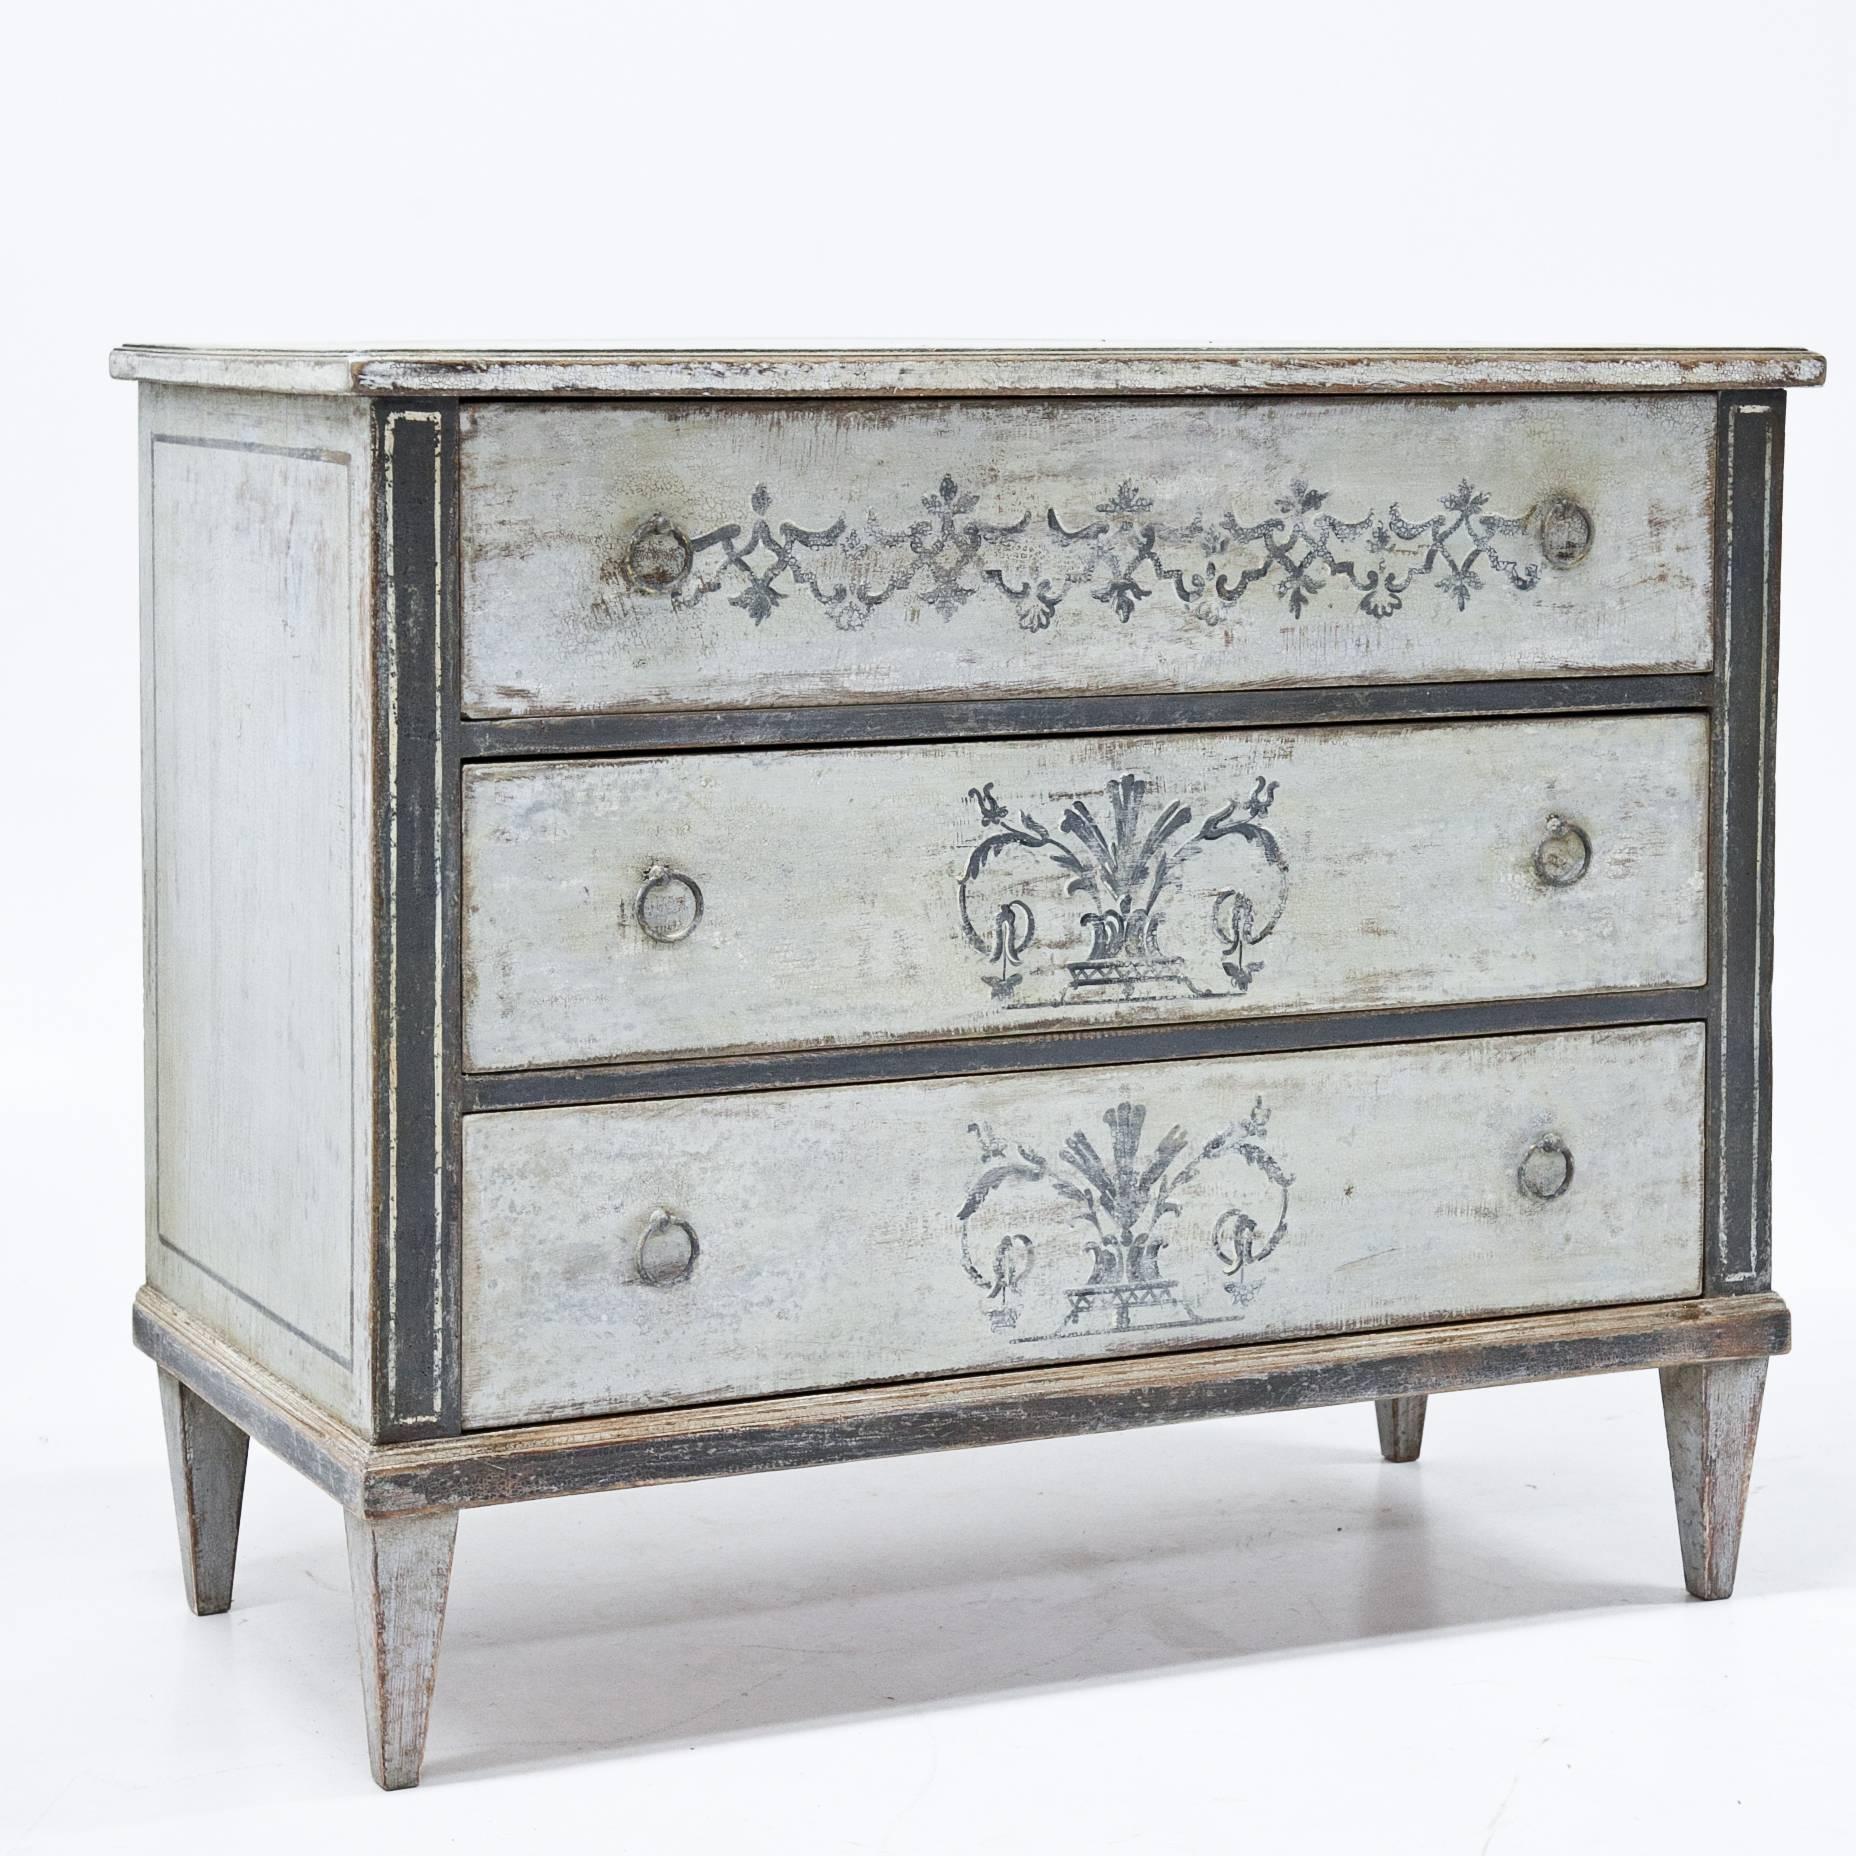 Blue Gustavian Style chest of drawers on tapered legs. The streamlined body has three drawers and a lock on the side. The pale blue paint is new and has a decorative worn look to it.